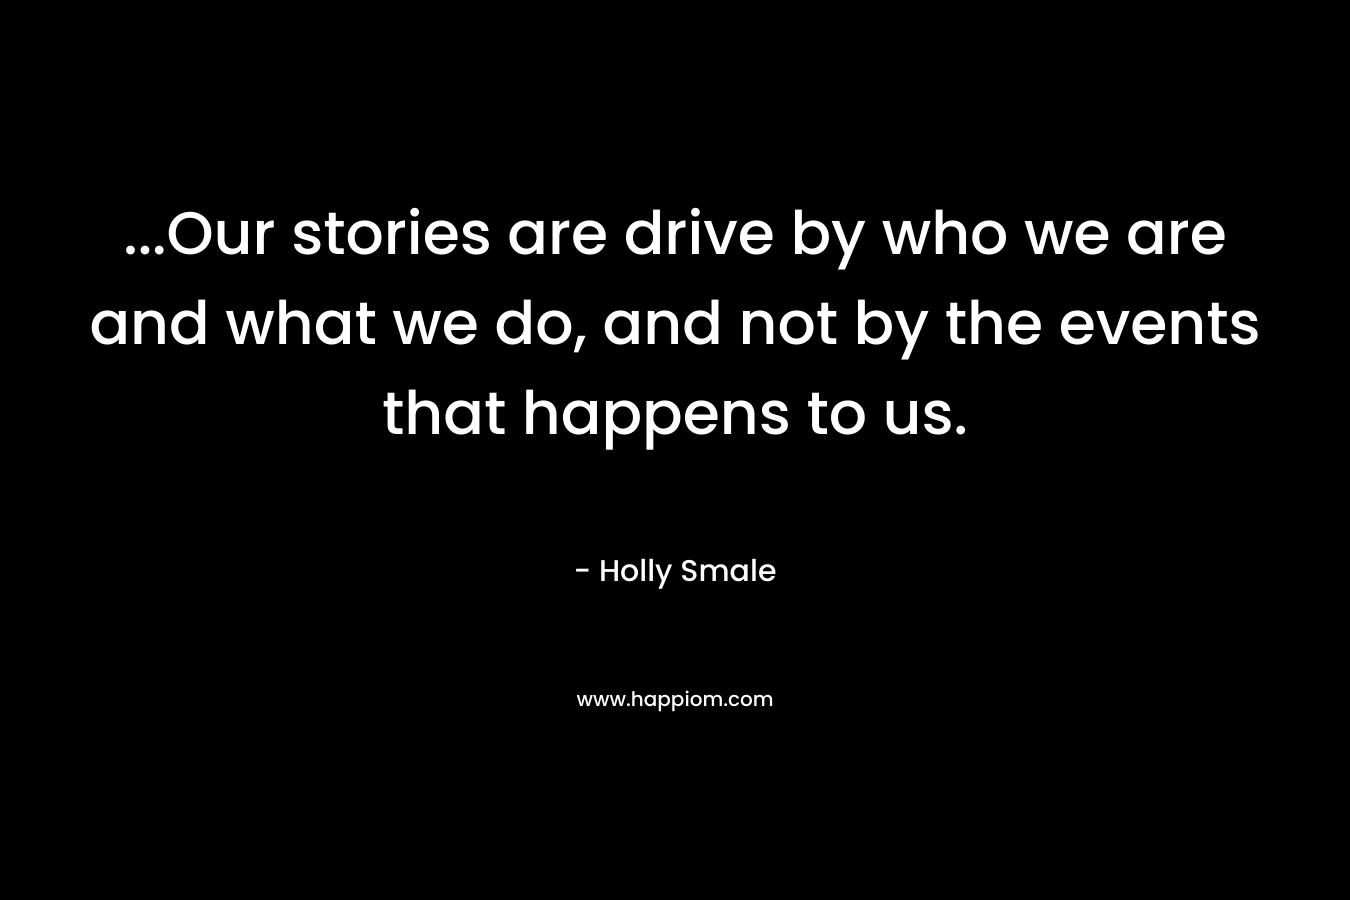 ...Our stories are drive by who we are and what we do, and not by the events that happens to us.